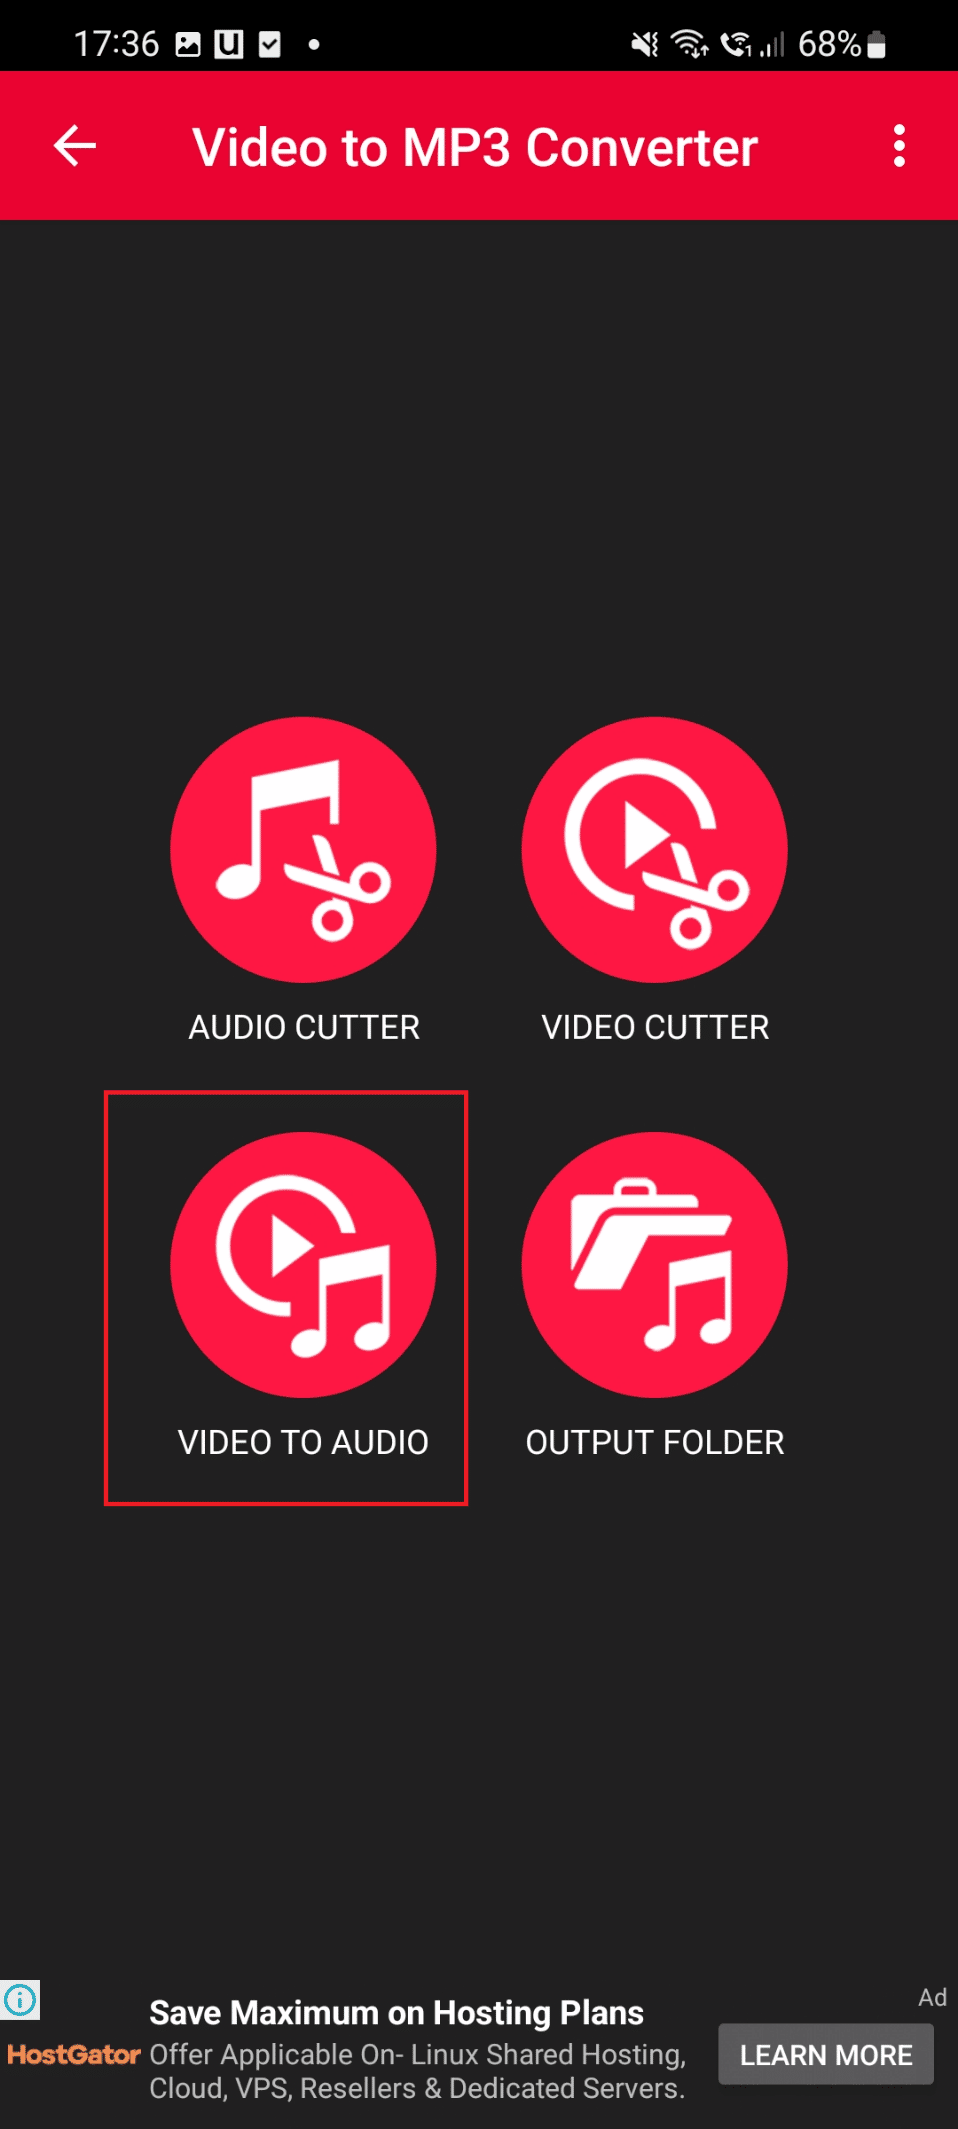 video to audio on video to mp3 converter app